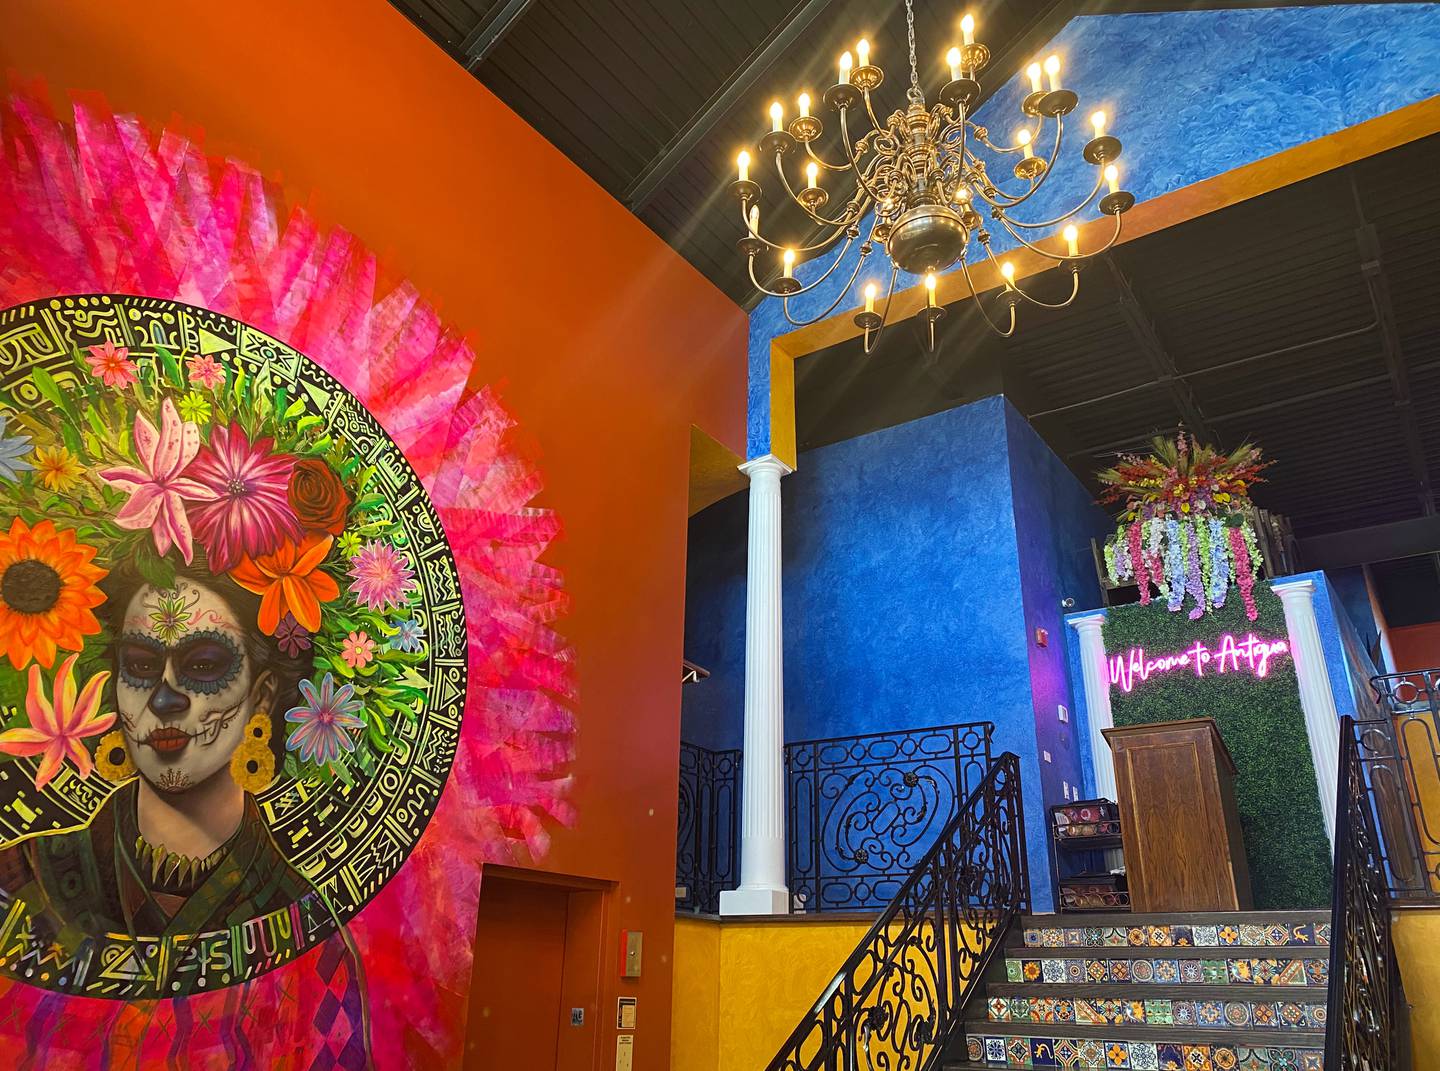 The vibe at Antigua Mexican Brunch and Grill is a wonderful melding of traditional Mexican restaurant elements with modern flair.